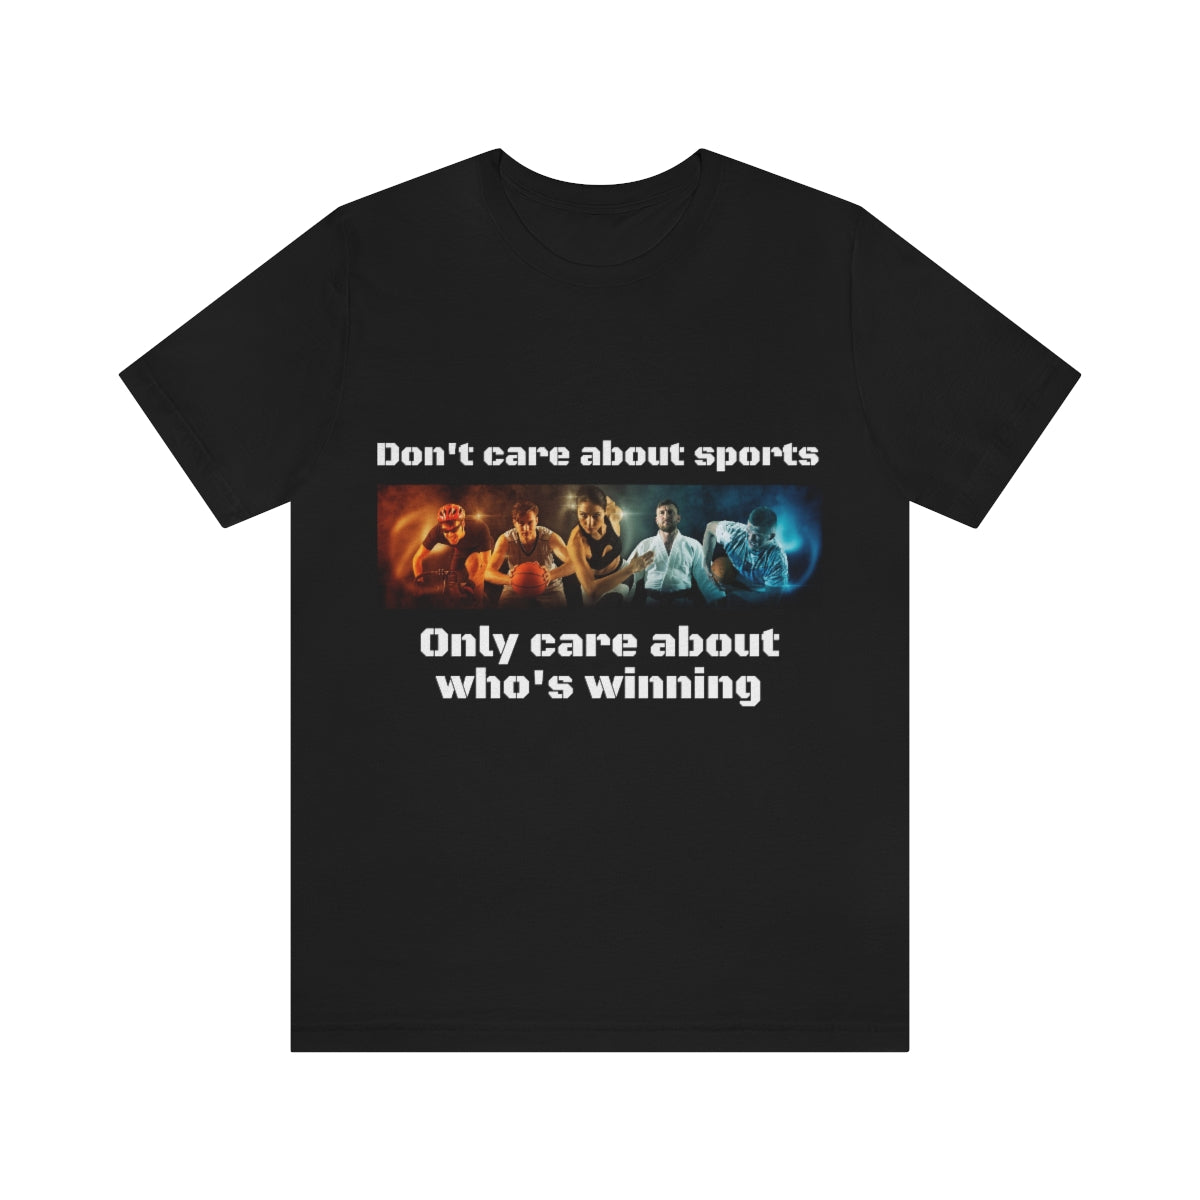 Don't Care about sports - Funny - Short Sleeve Tee